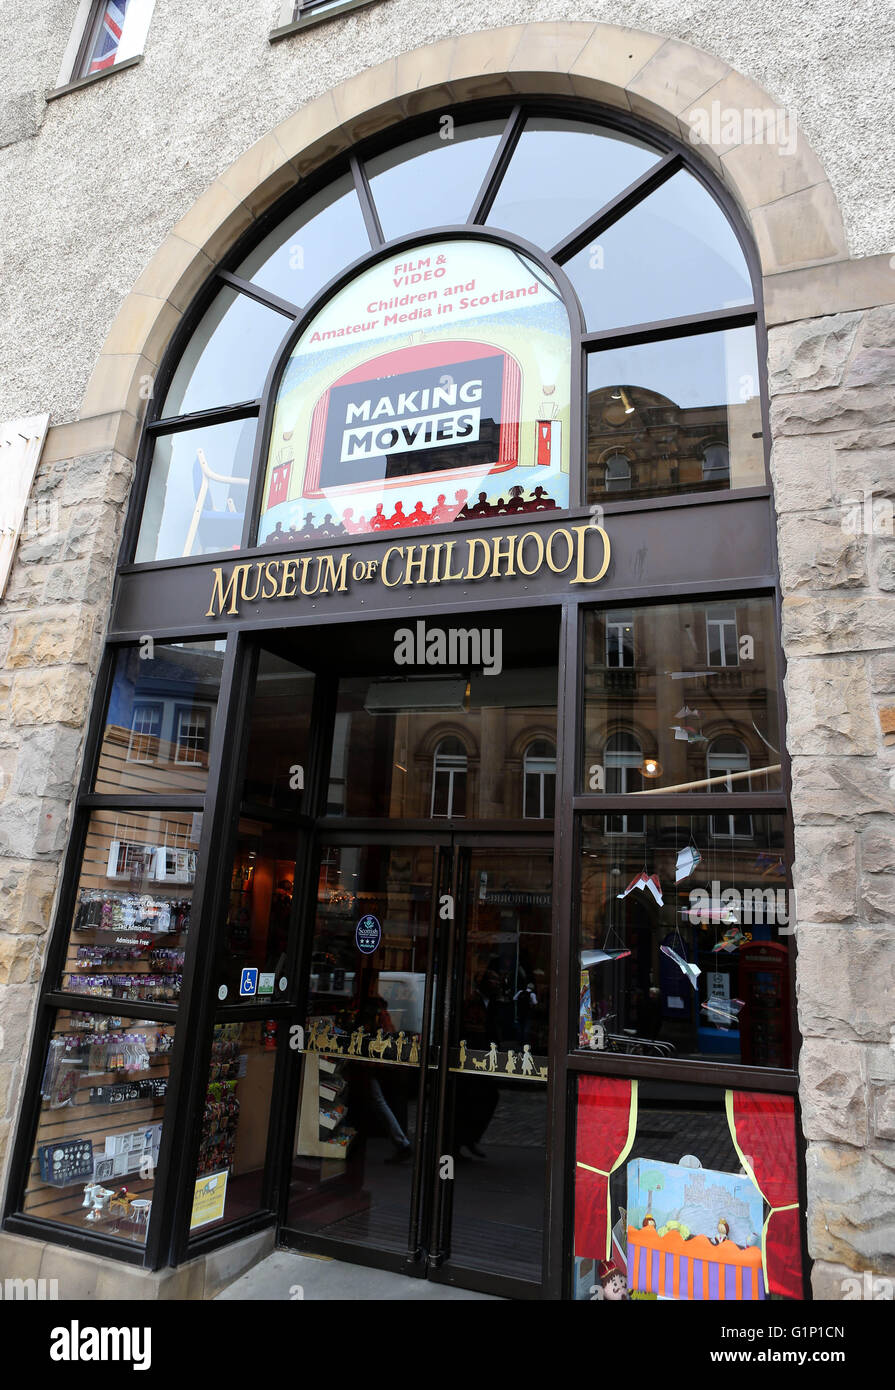 London, UK. 17th Sep, 2014. File Photo taken on Sept. 17, 2014 shows the Museum of Childhood in Edinburgh, Britain. International Museum Day is celebrated every year on or around May 18 under the coordination of the International Council of Museums (ICOM). © Han Yan/Xinhua/Alamy Live News Stock Photo